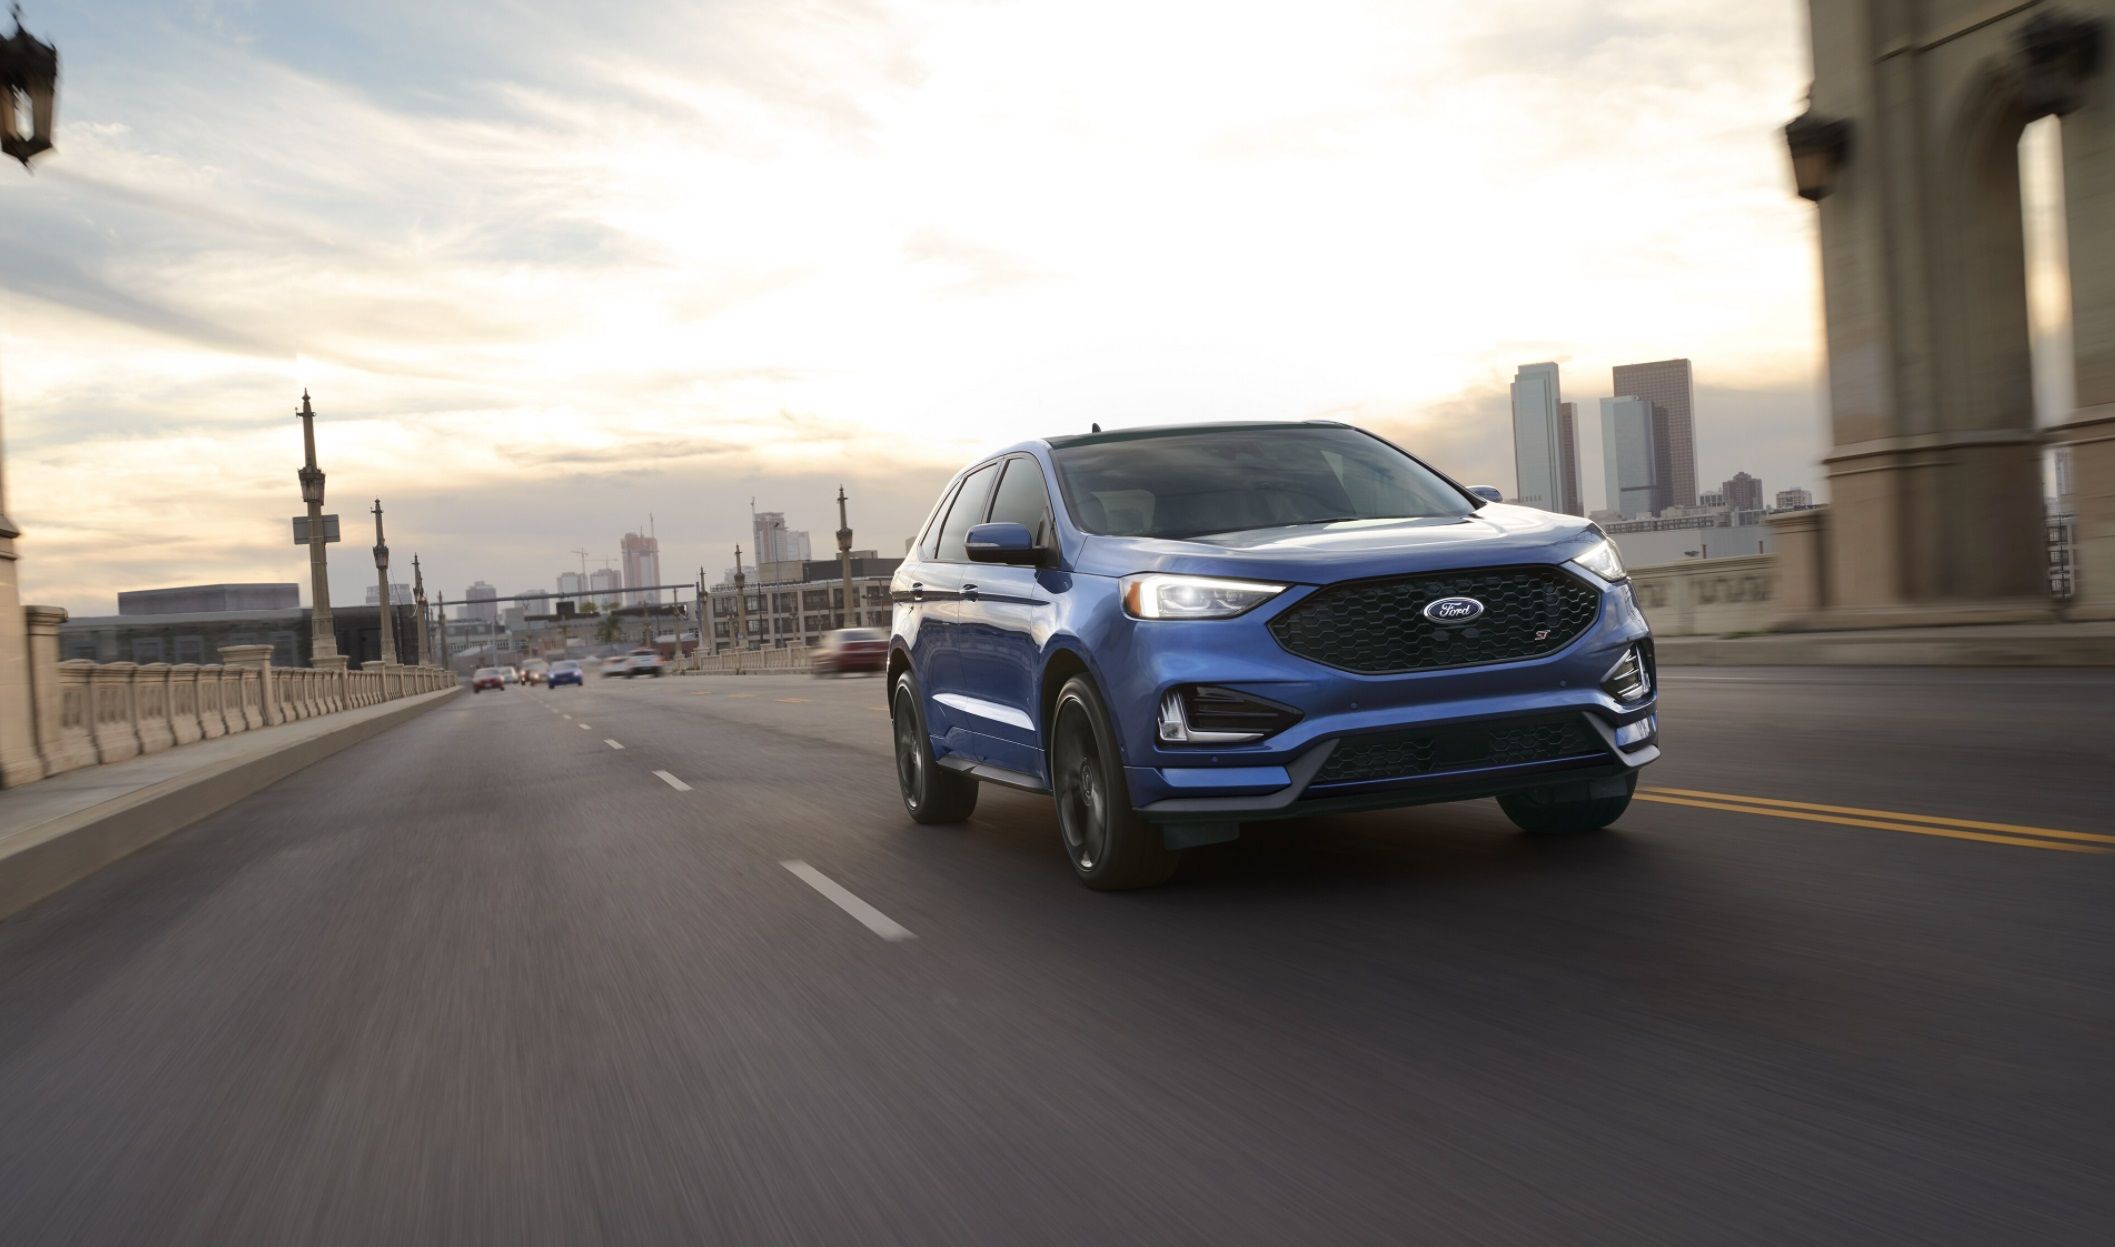 Ford Edge Vs Escape Here's How These Two Rides Compare